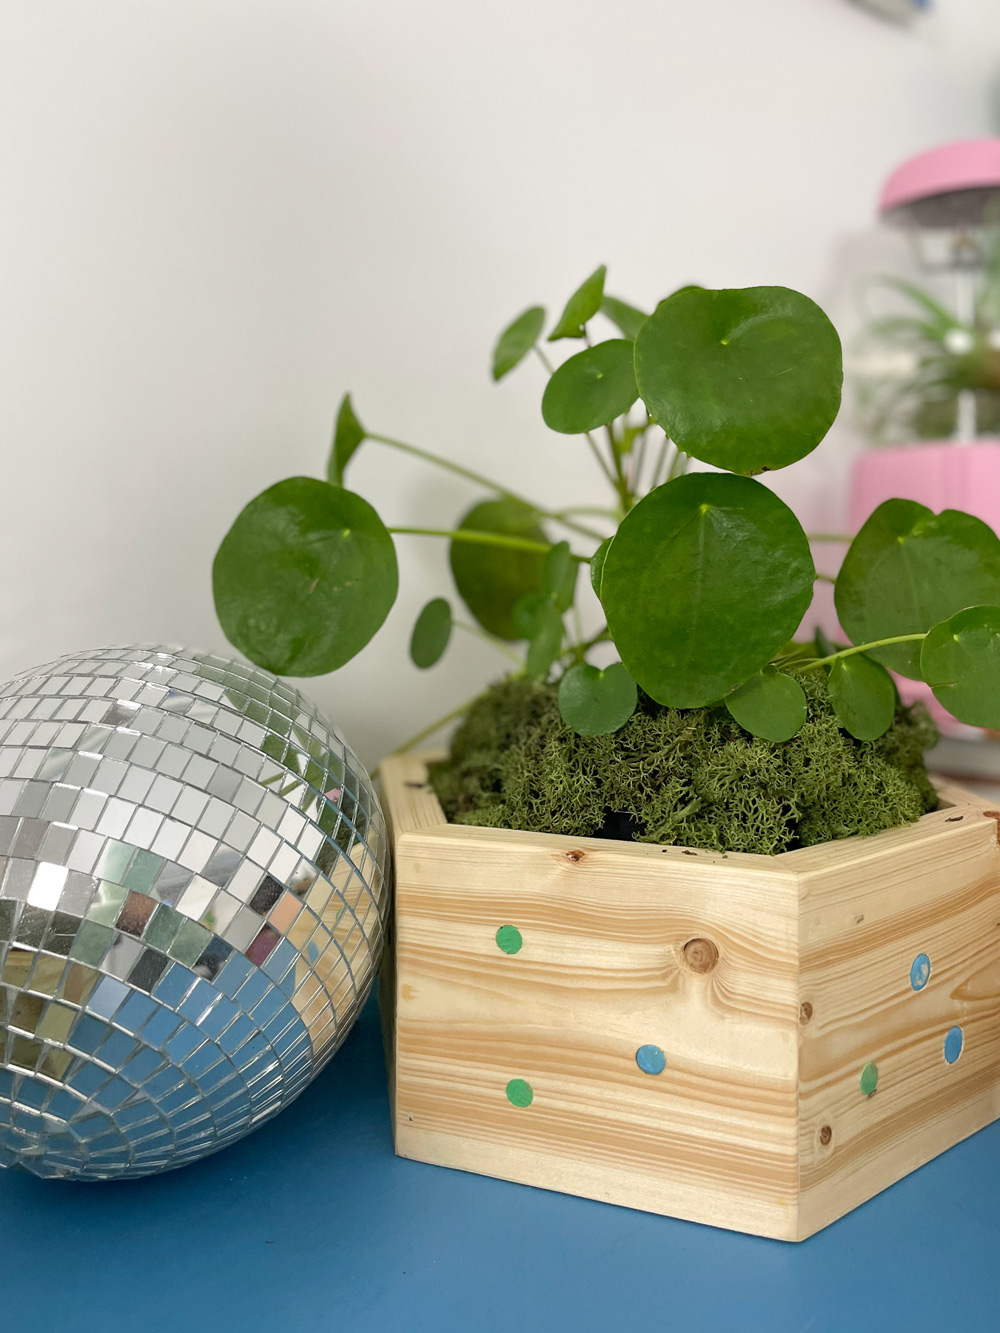 A finished DIY Hexagonal planter next to a small disco ball on a table.